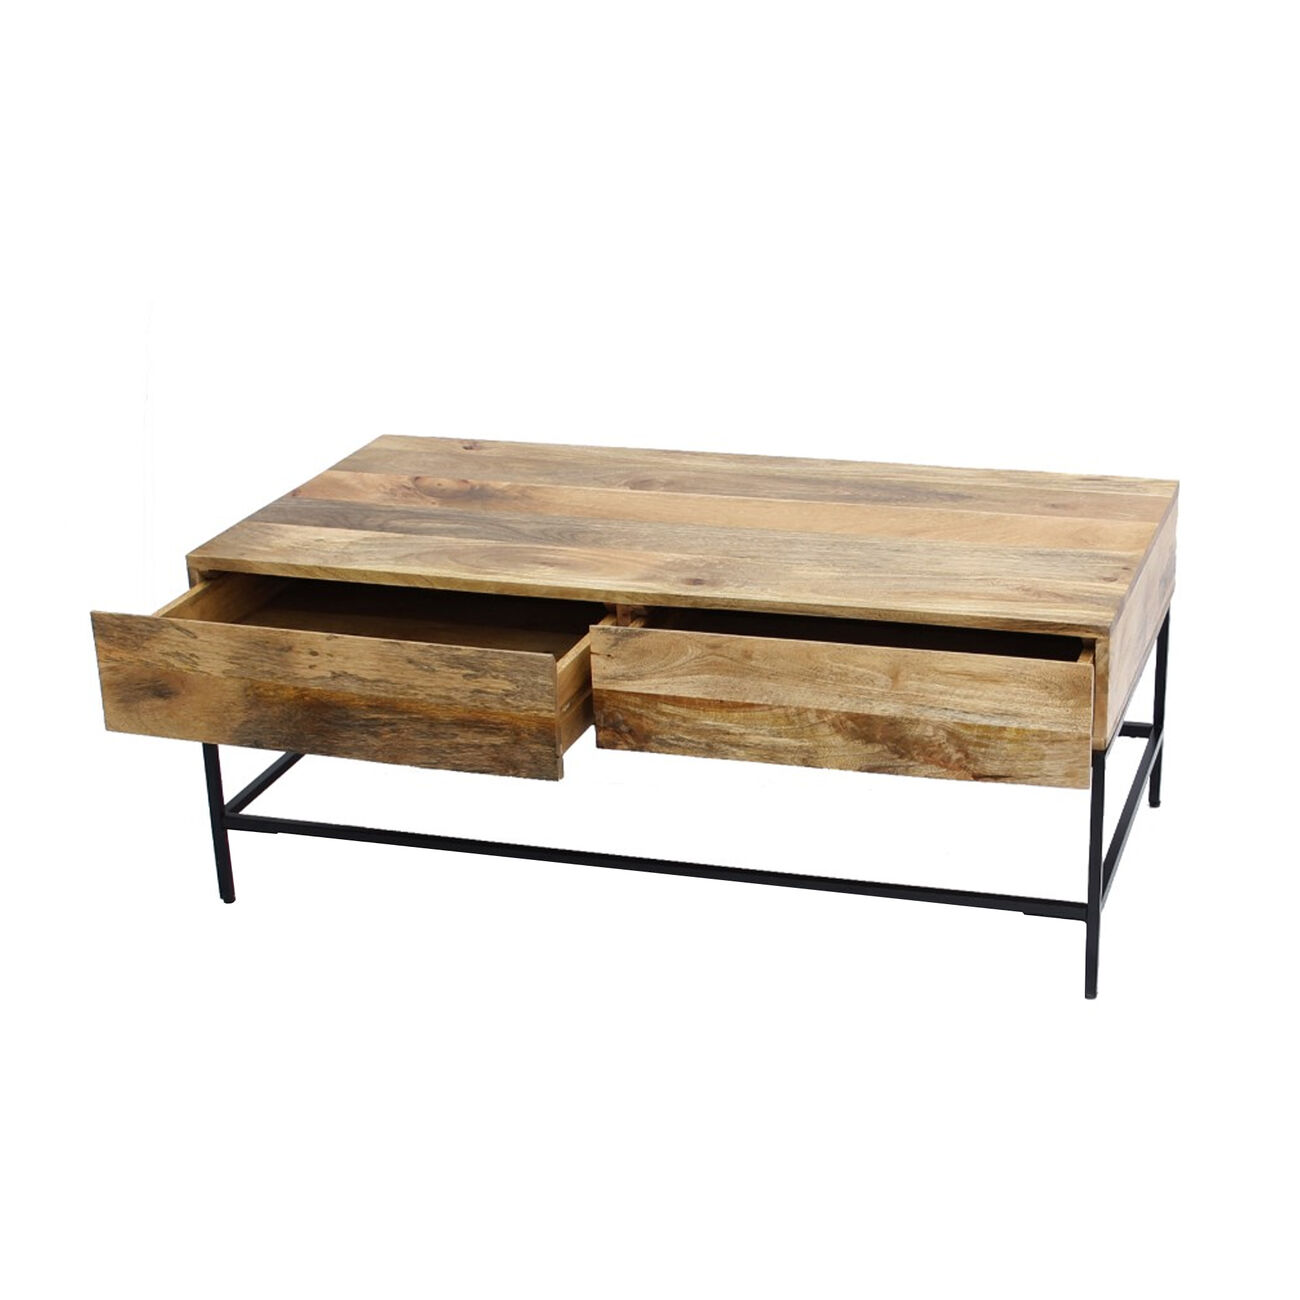 The Urban Port Mango Wood Coffee Table with 2 Drawers, Brown and Black